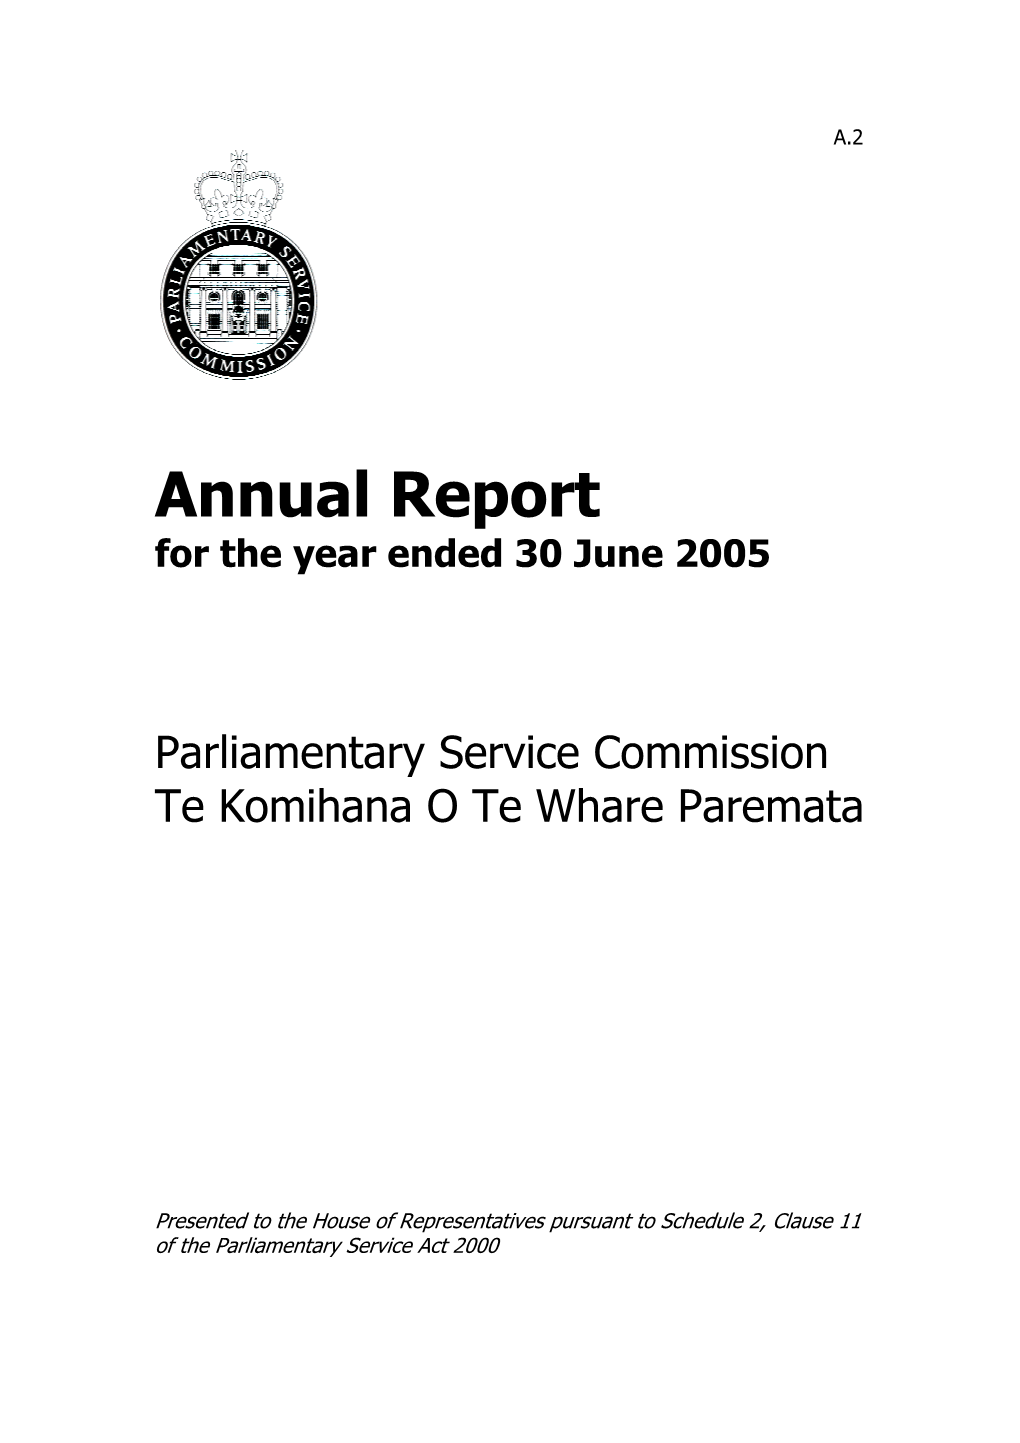 Annual Report for the Year Ended 30 June 2005